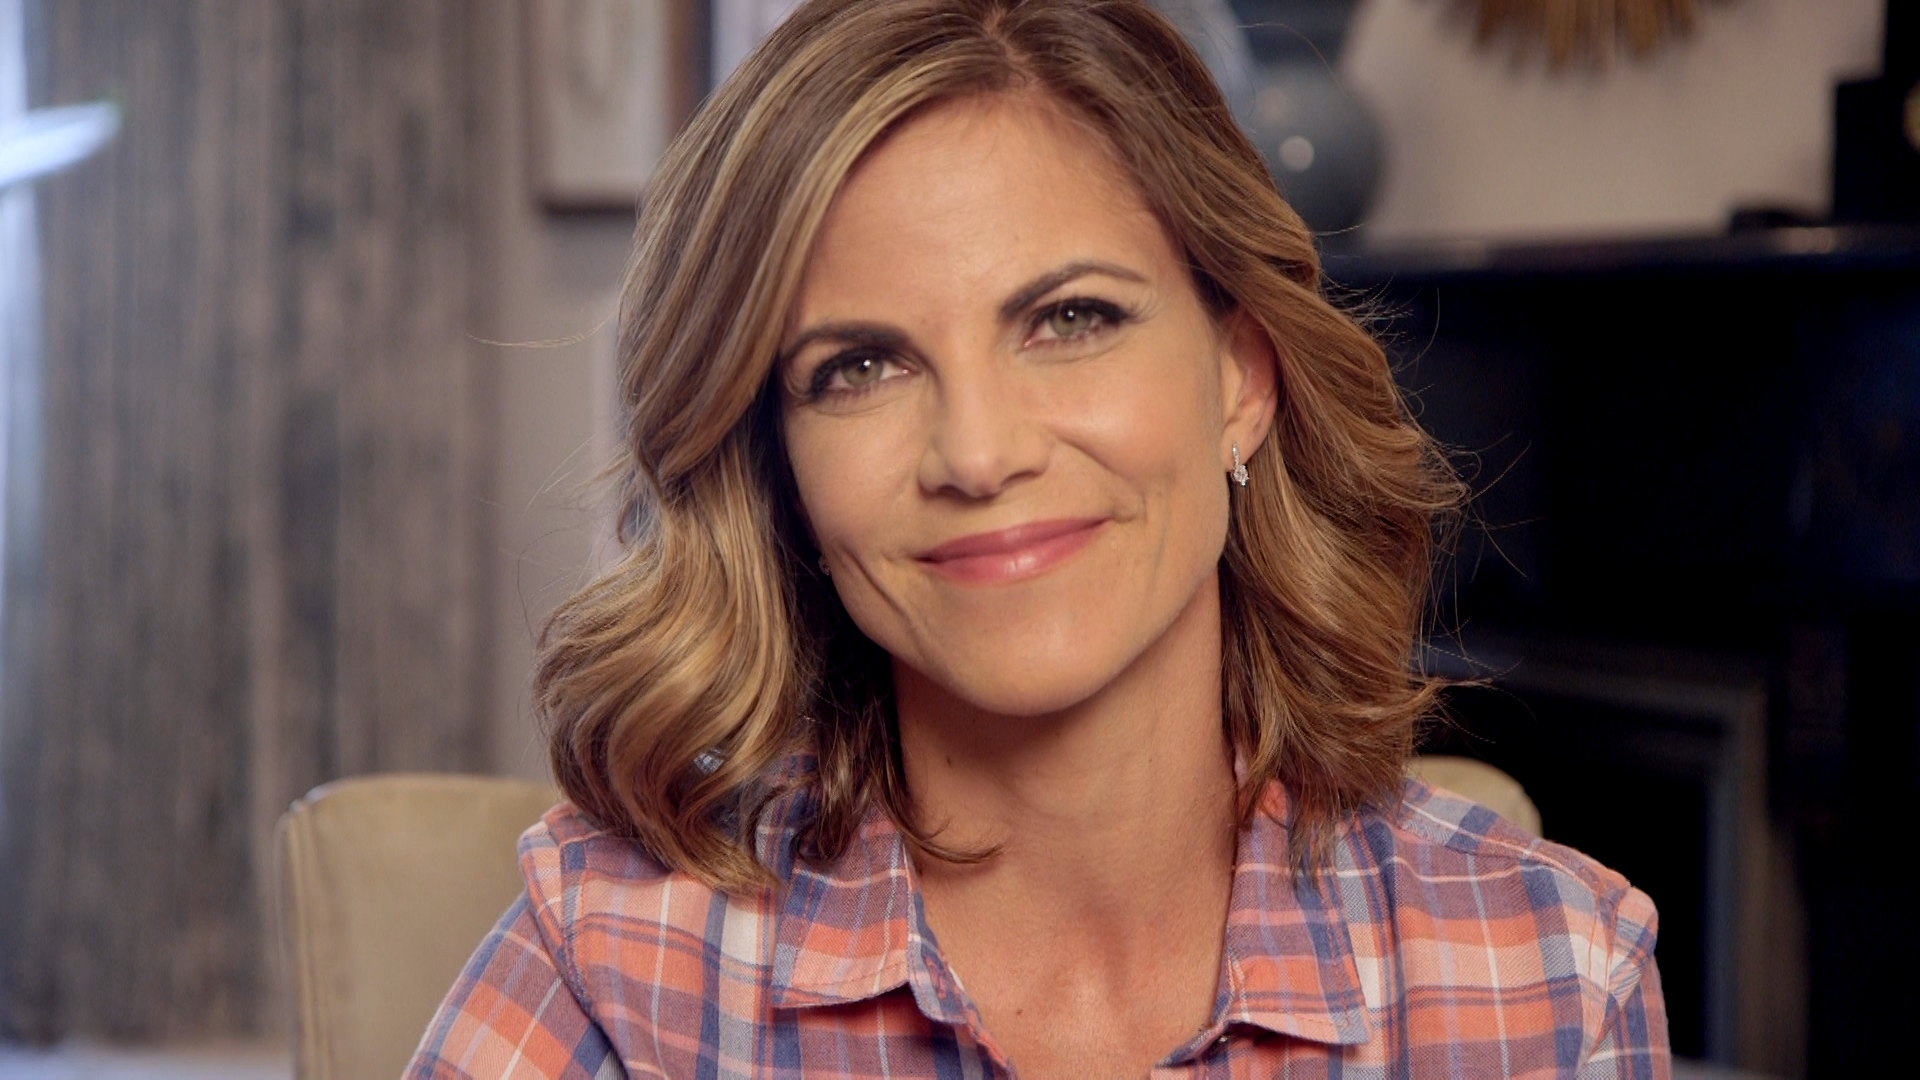 At Home With Natalie Morales: She Shares Her Slow Cooker Ropa Vieja